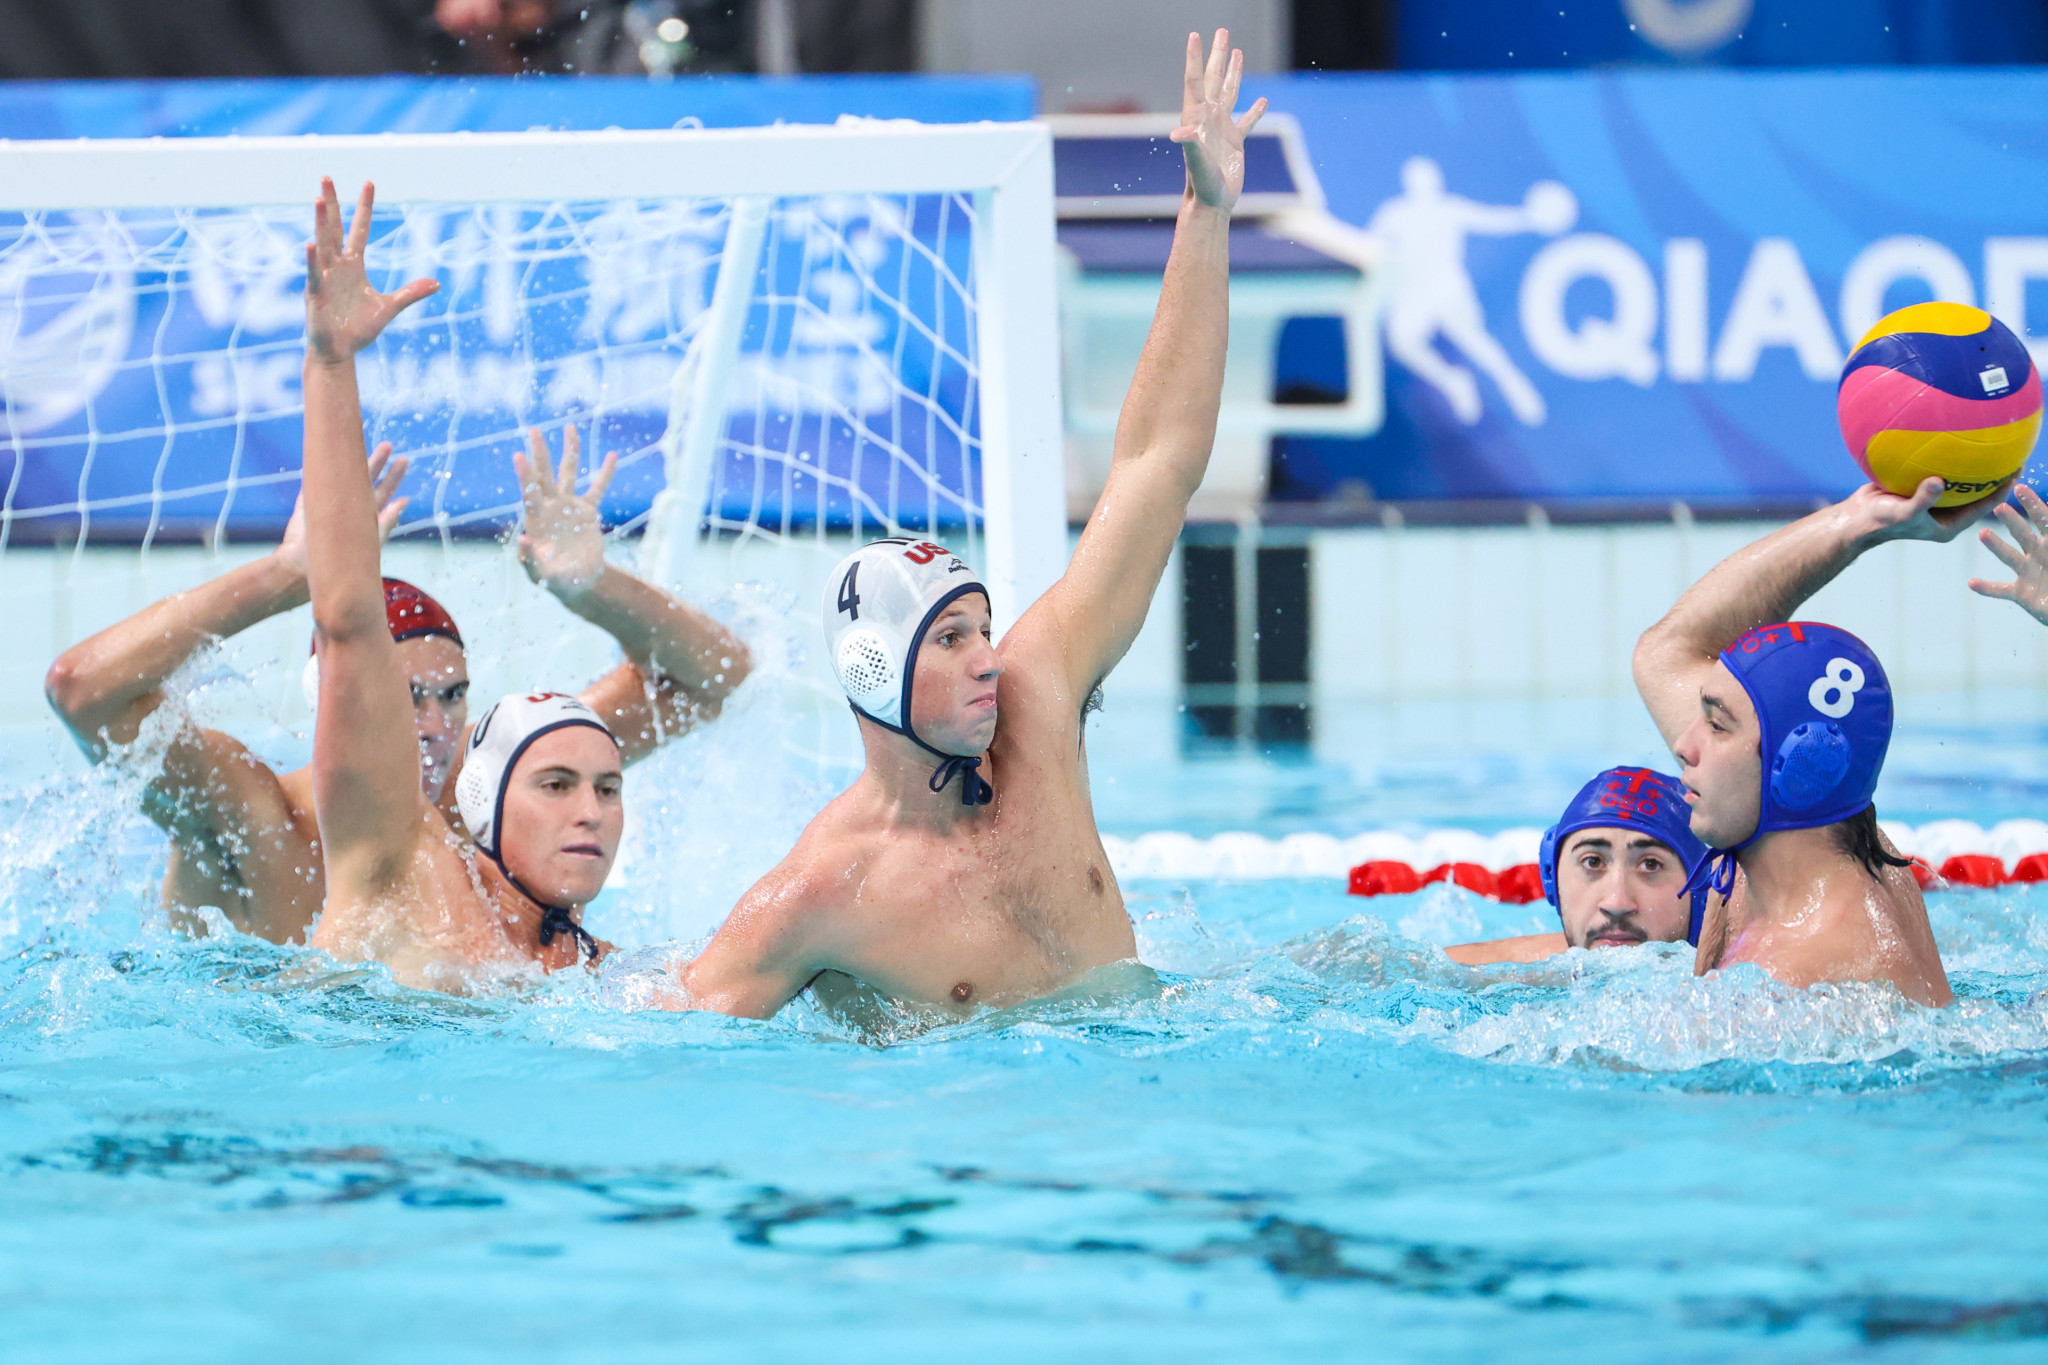 Georgia claimed men's water polo bronze after beating the United States ©FISU